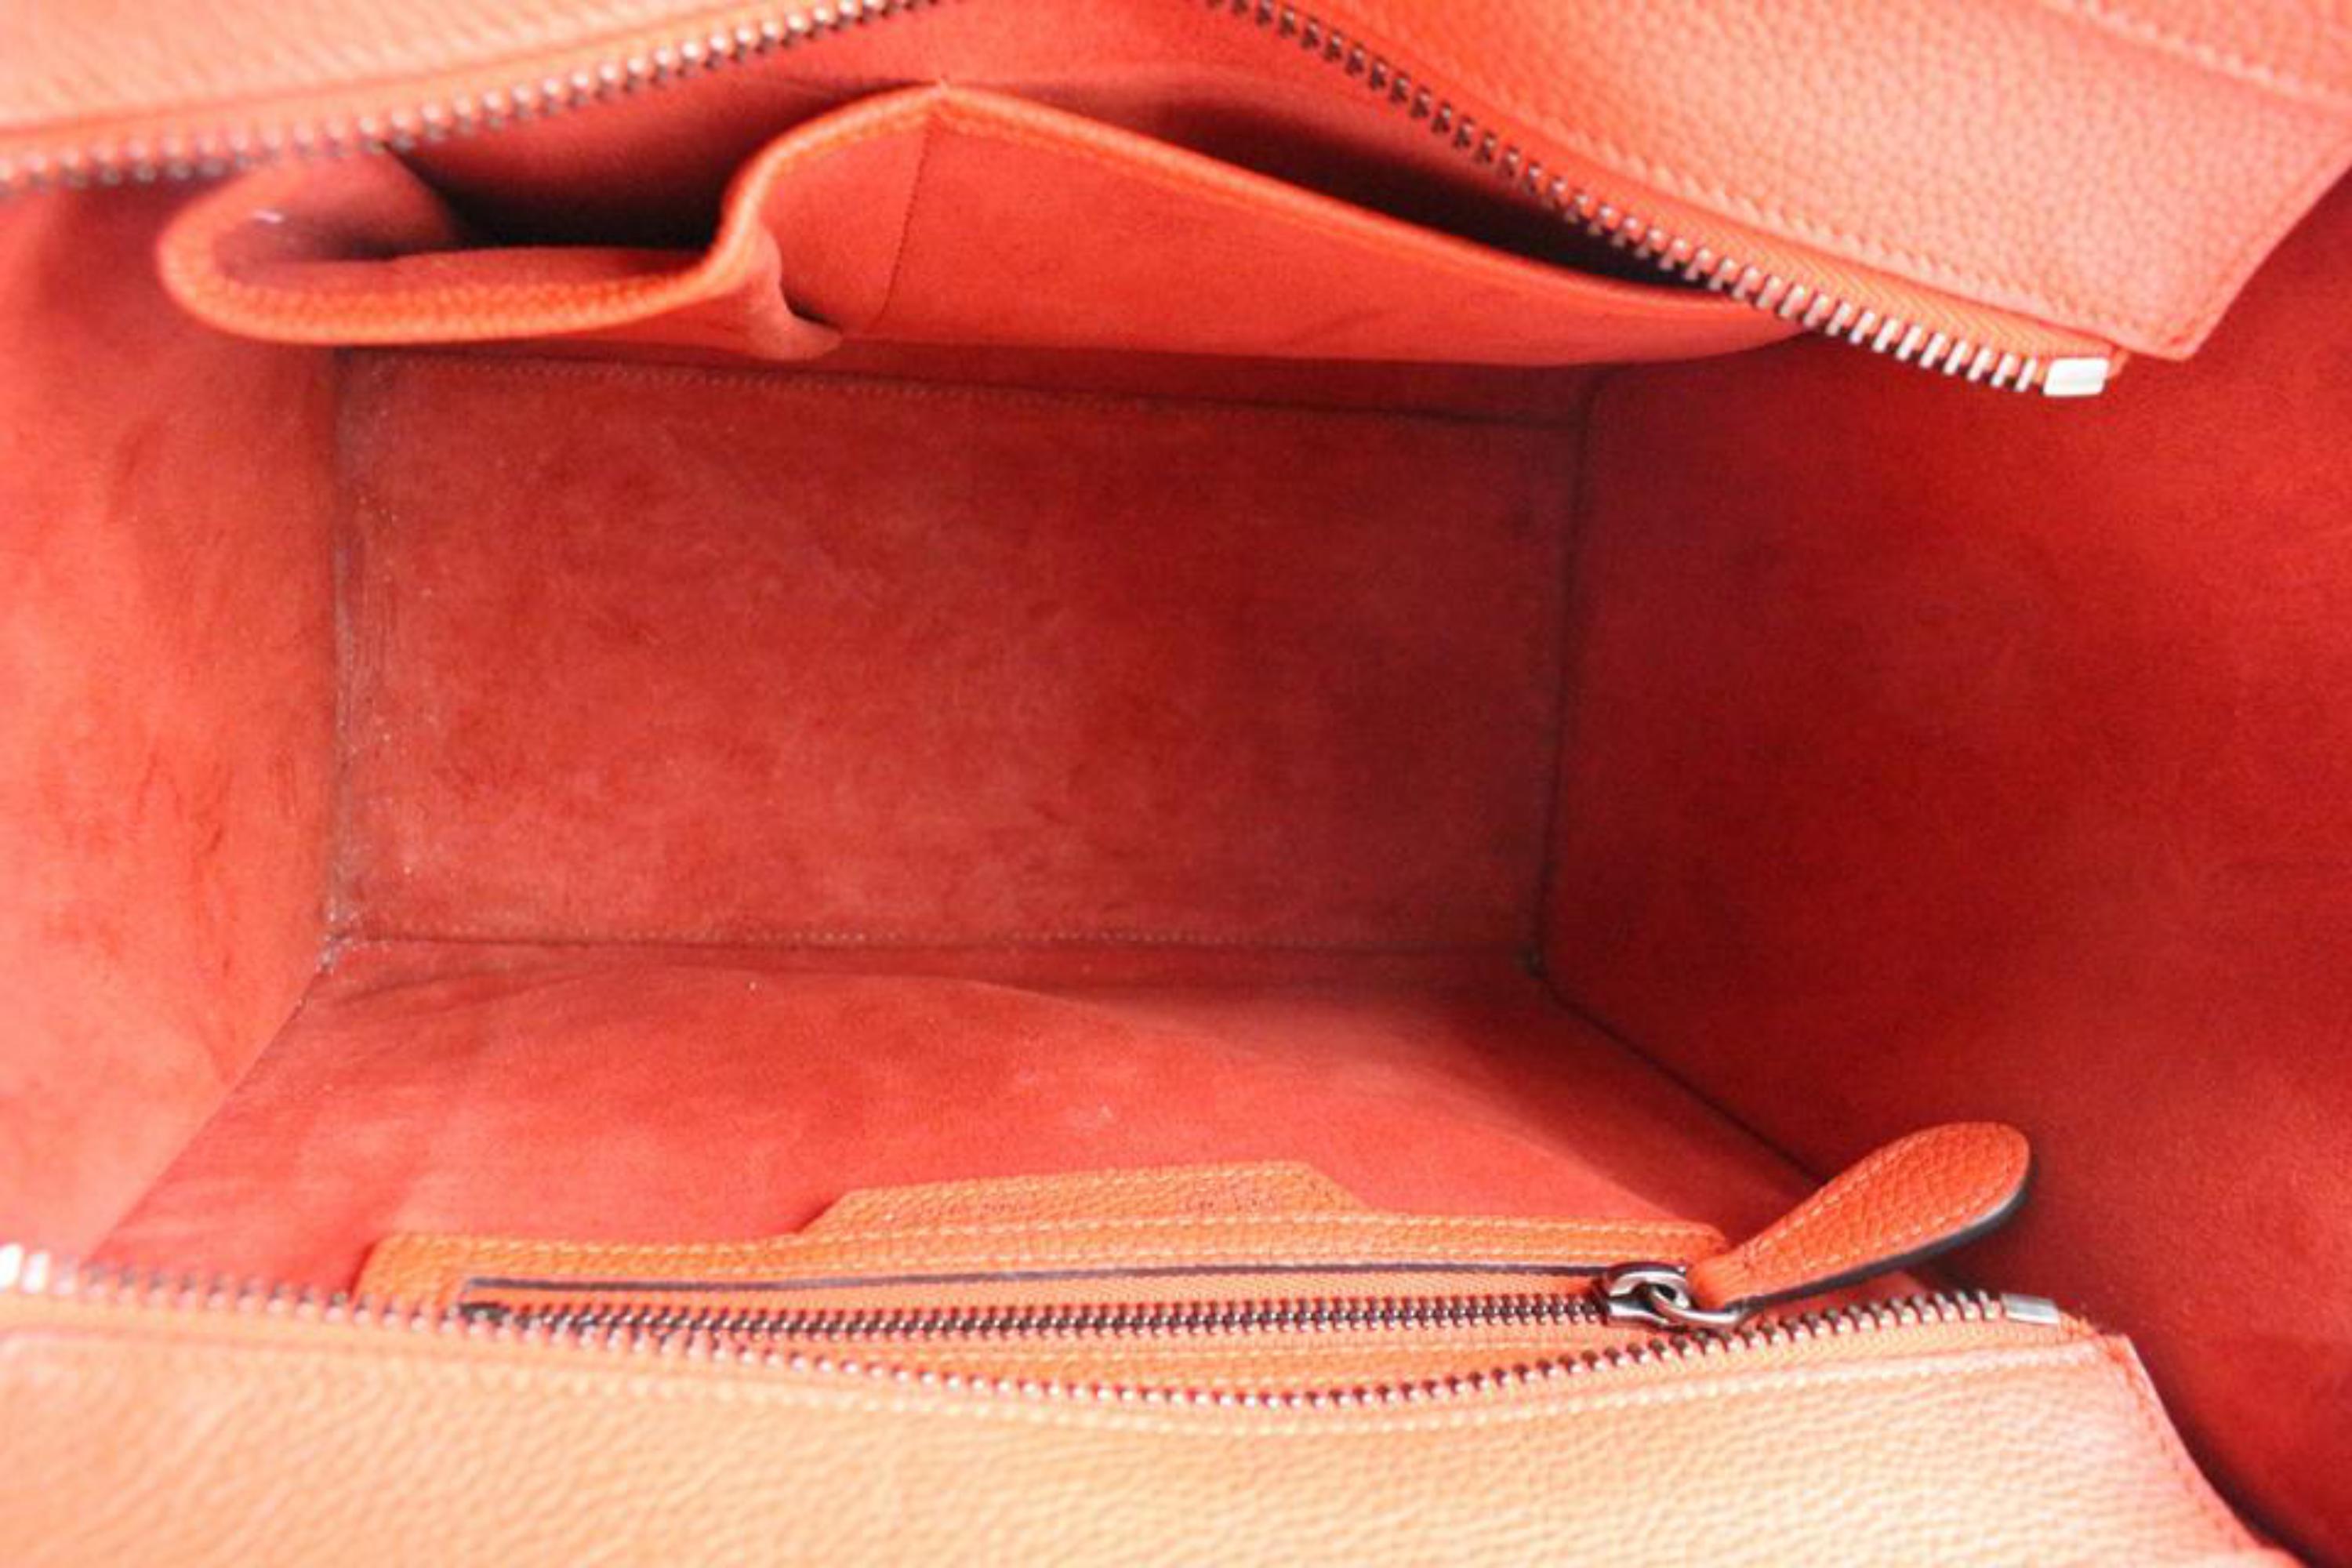 Céline Luggage Mini 29cer0501 Vermillion Leather Shoulder Bag In New Condition For Sale In Forest Hills, NY